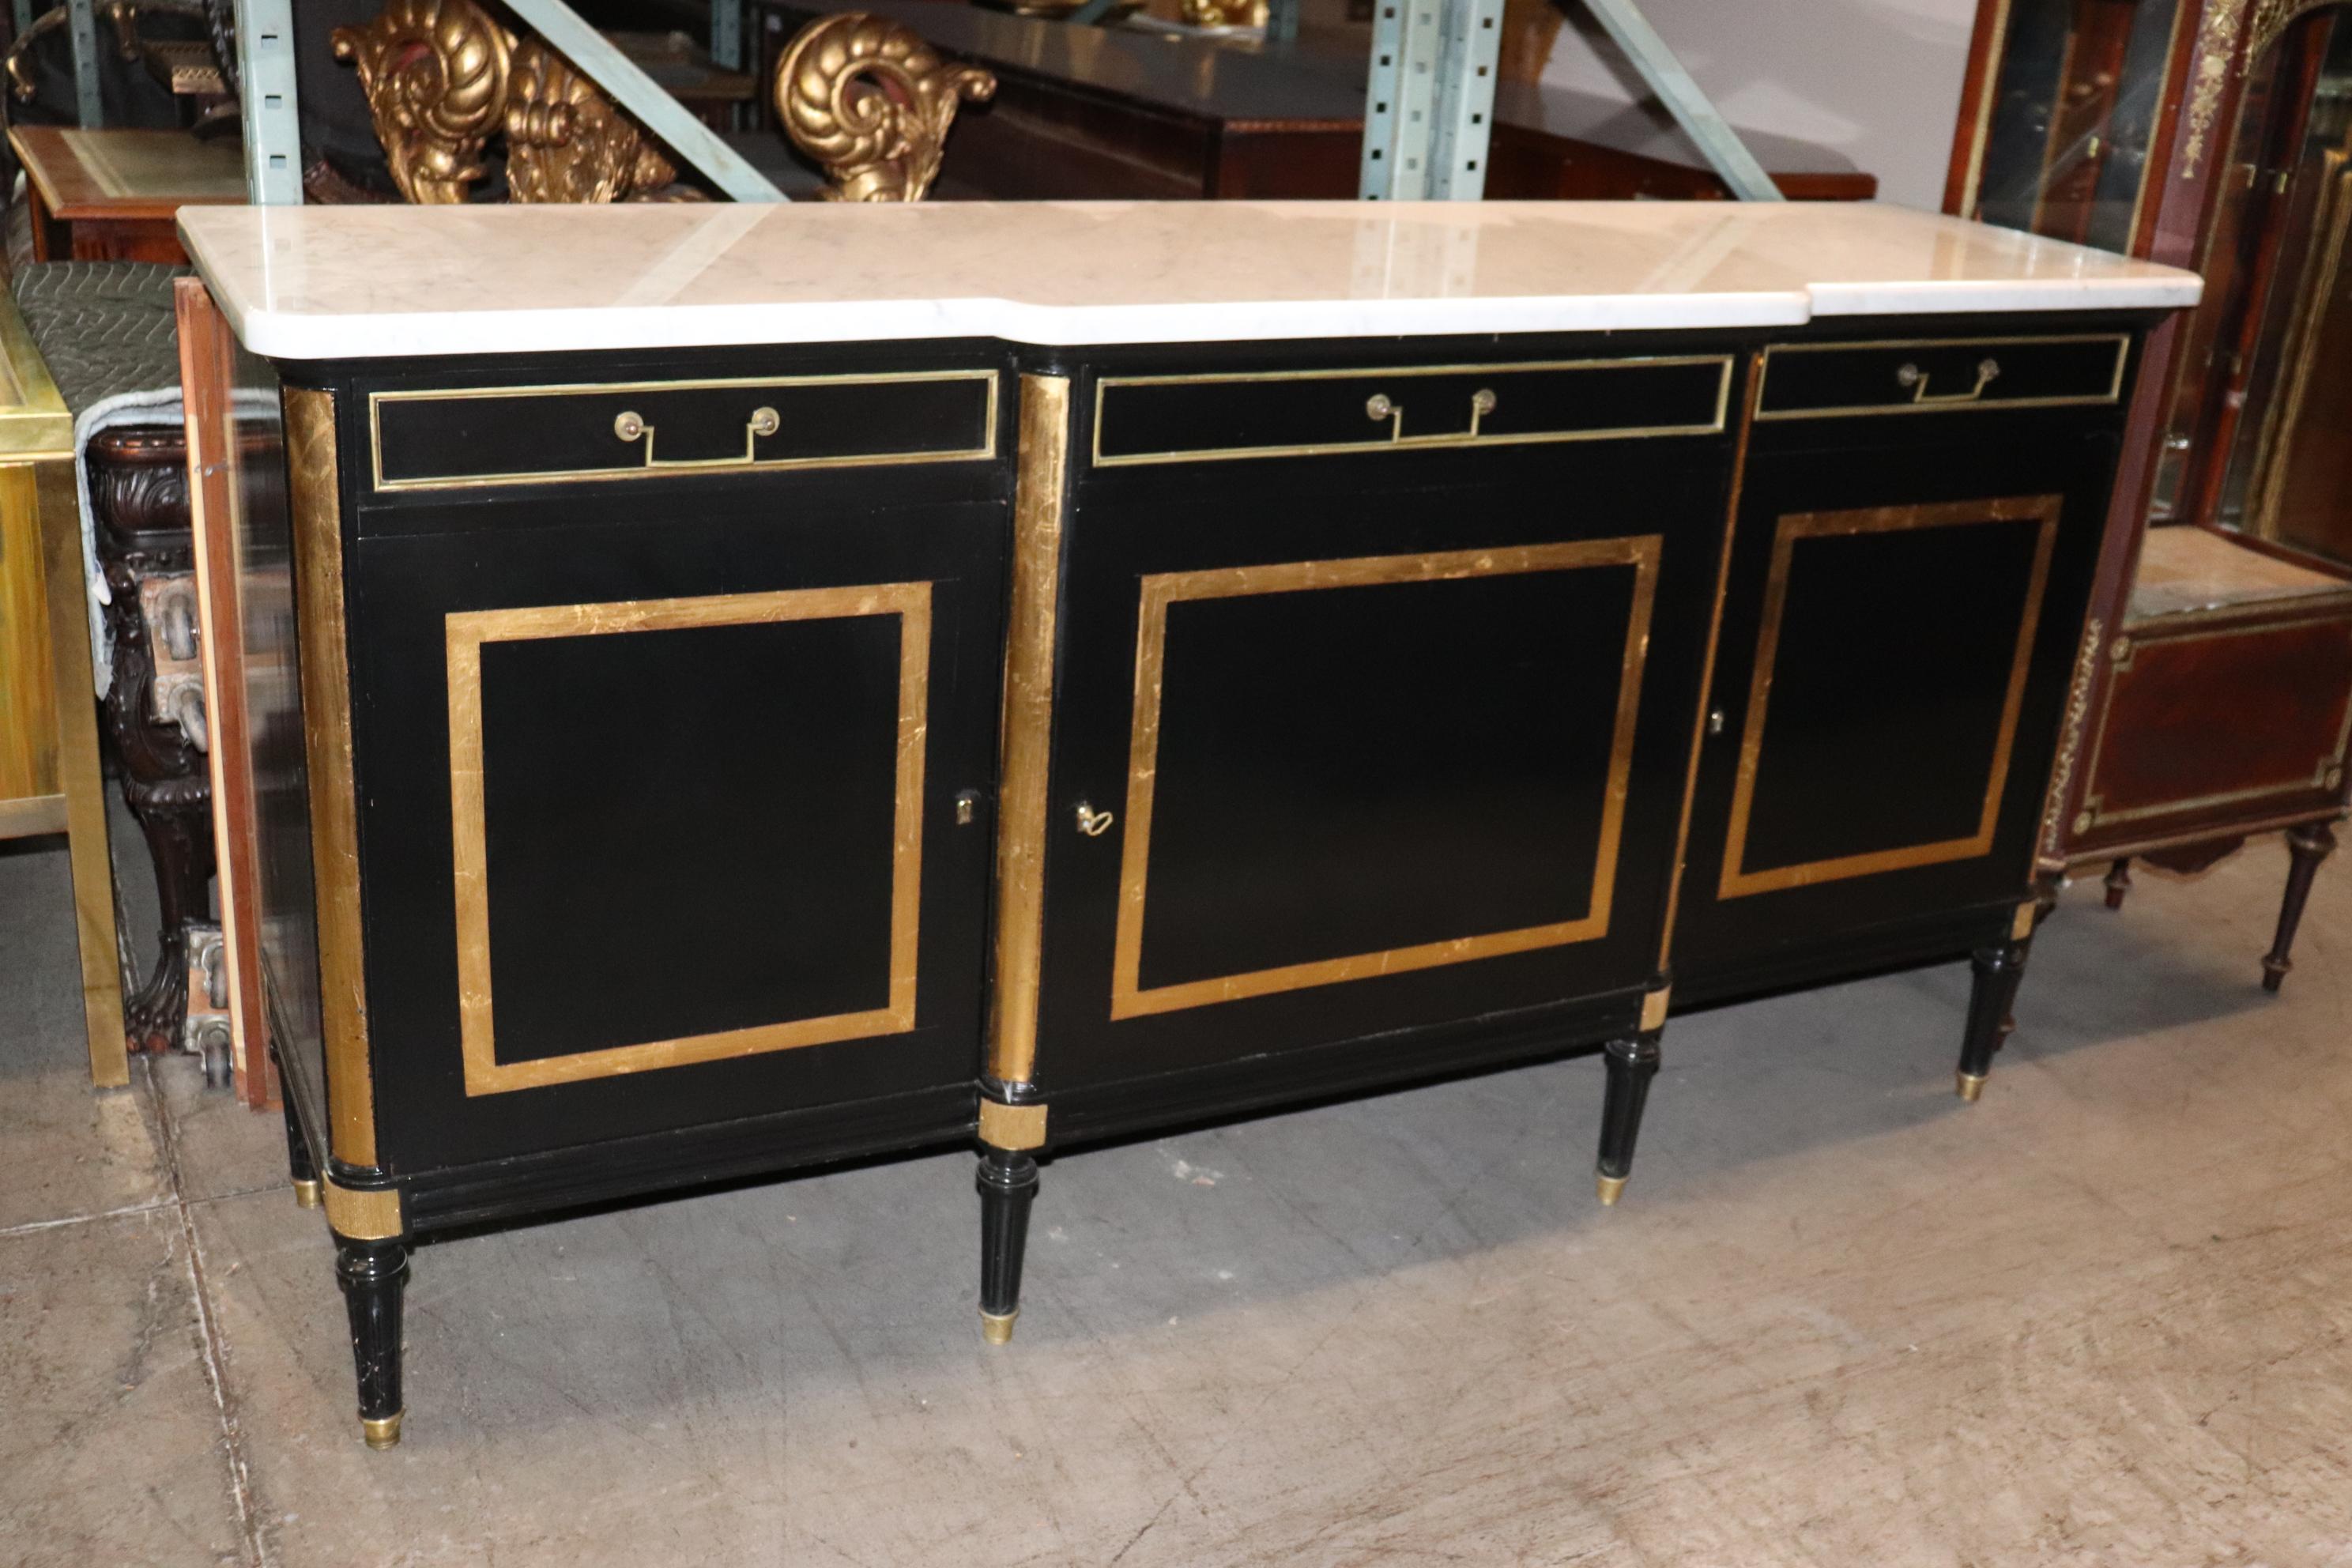 This includes professionally made shelves, brass pins and a full detail to the best possible condition for the customer:

This is a superb Maison signed Jansen Directoire sideboard. The sideboard is done in ebonized black lacquer and has gold leaf